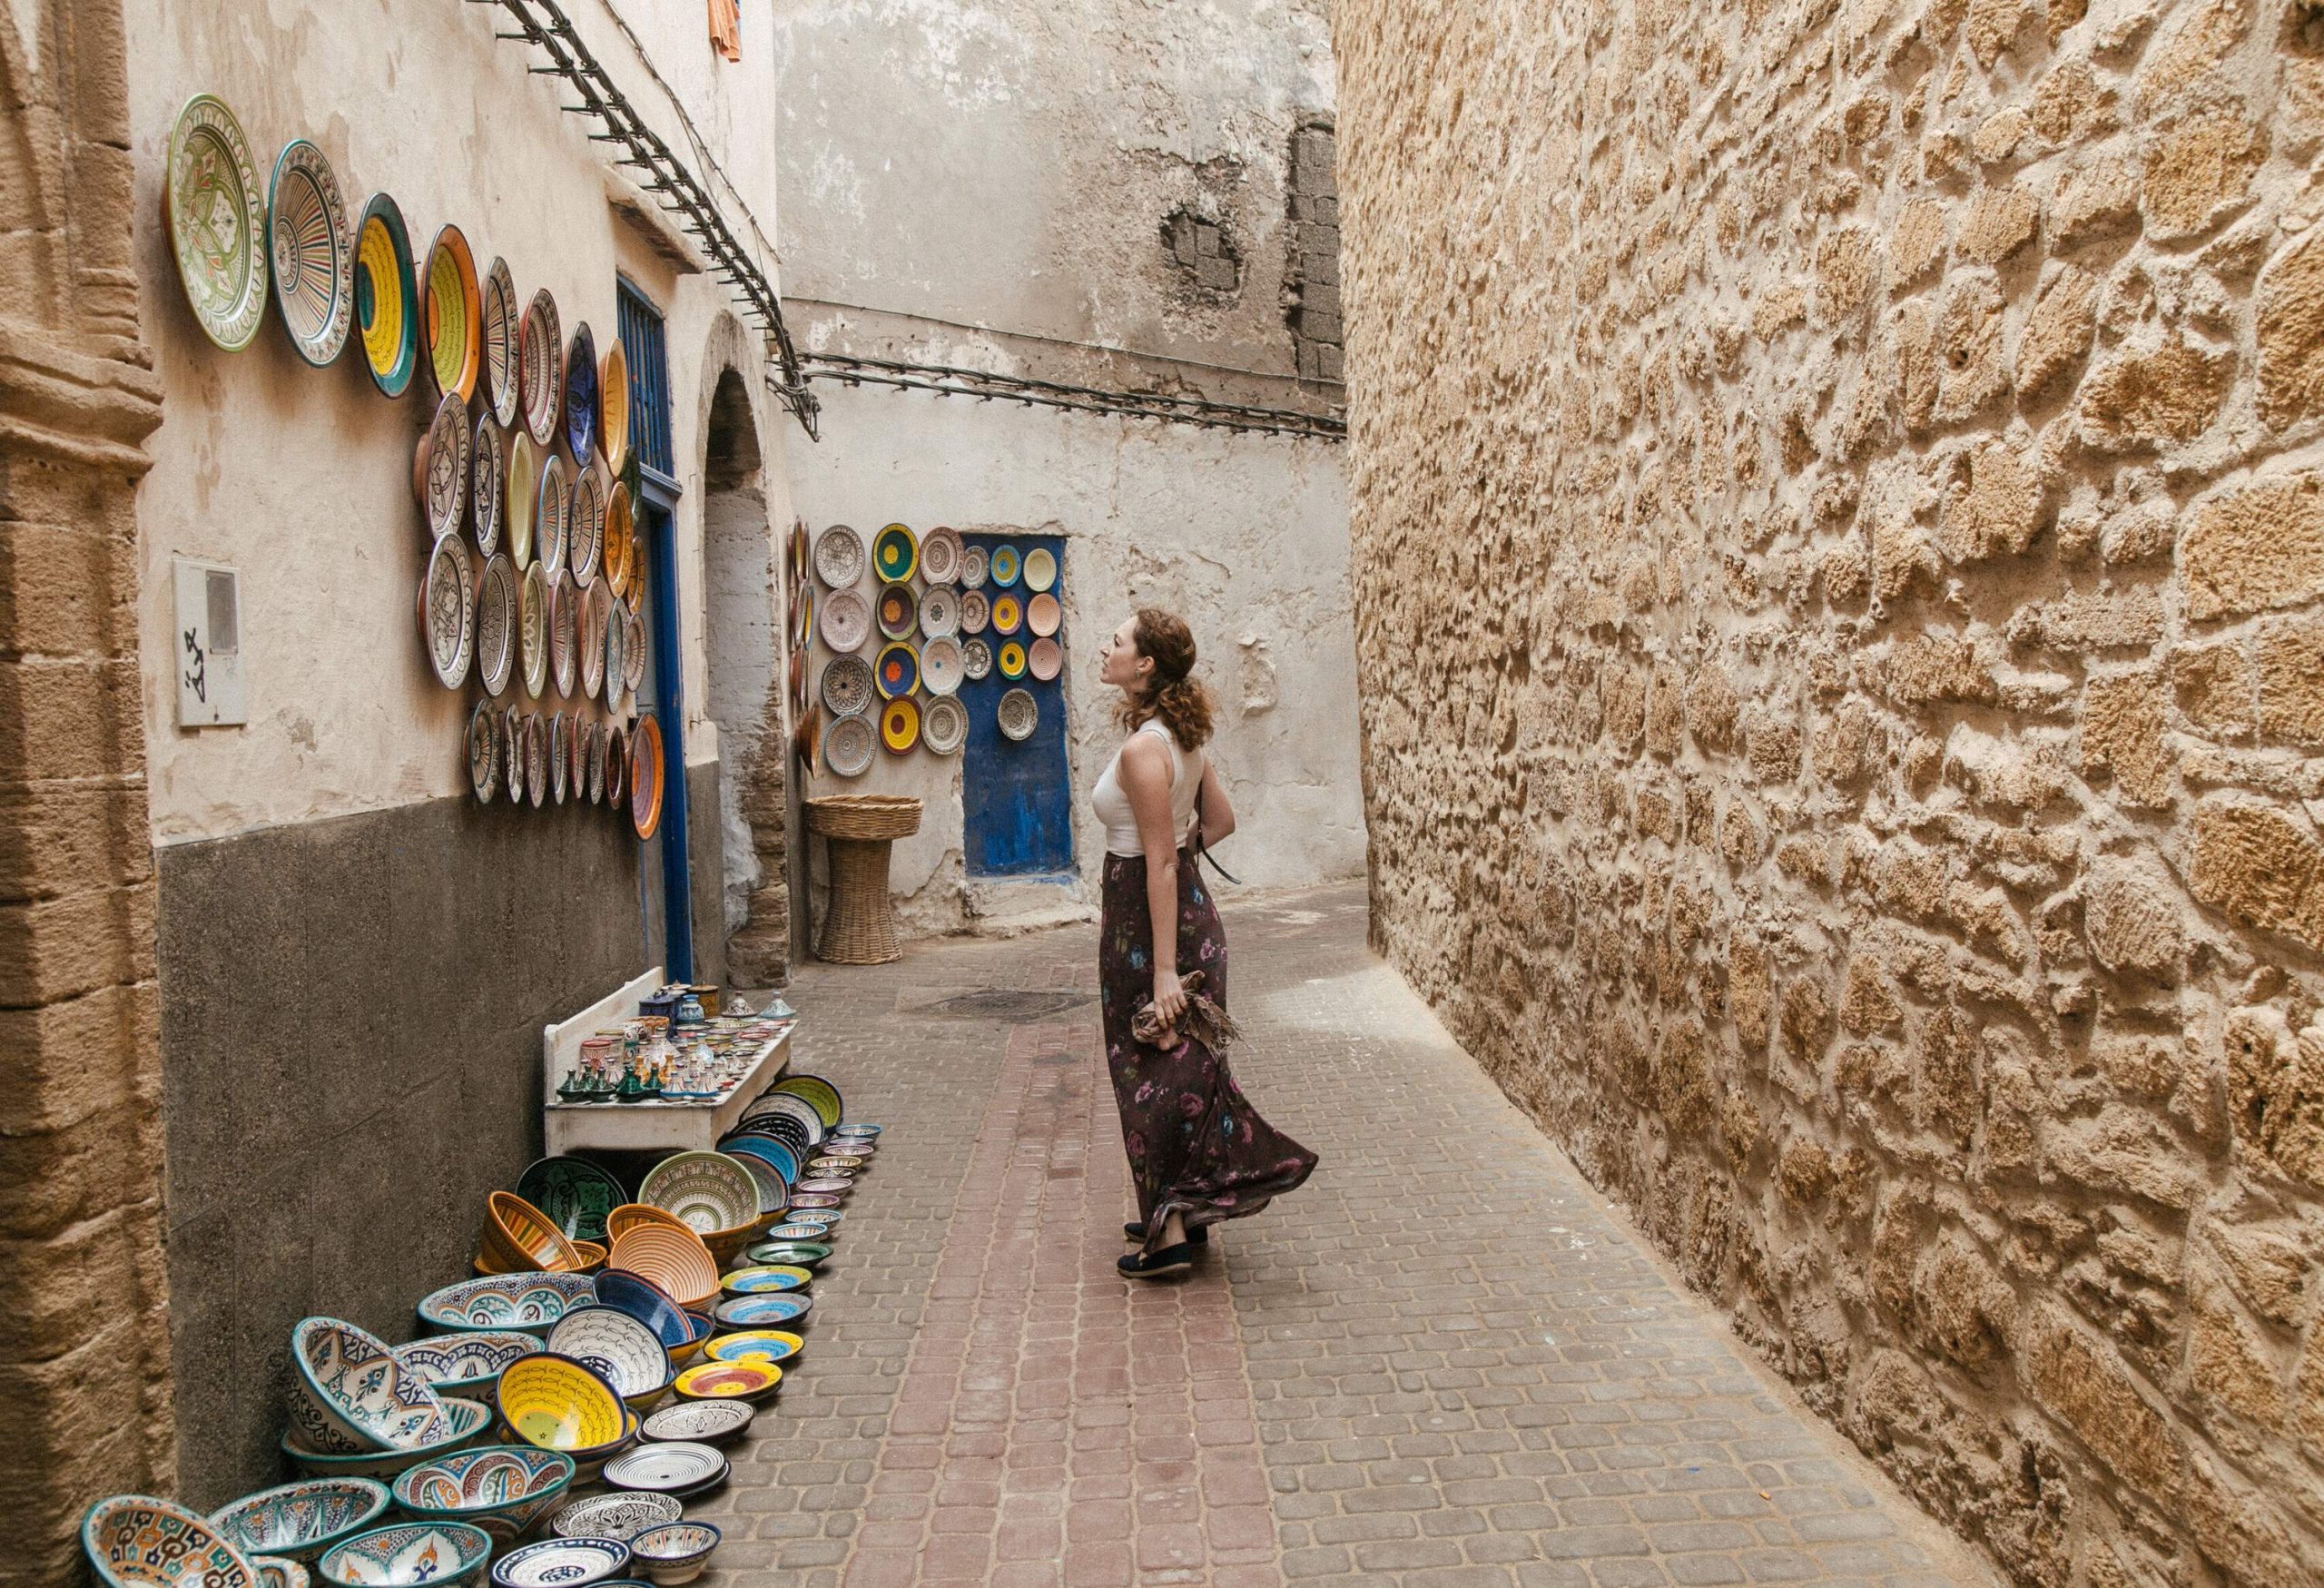 A woman in a narrow street looks at the displayed colourful ceramic plates and bowls.